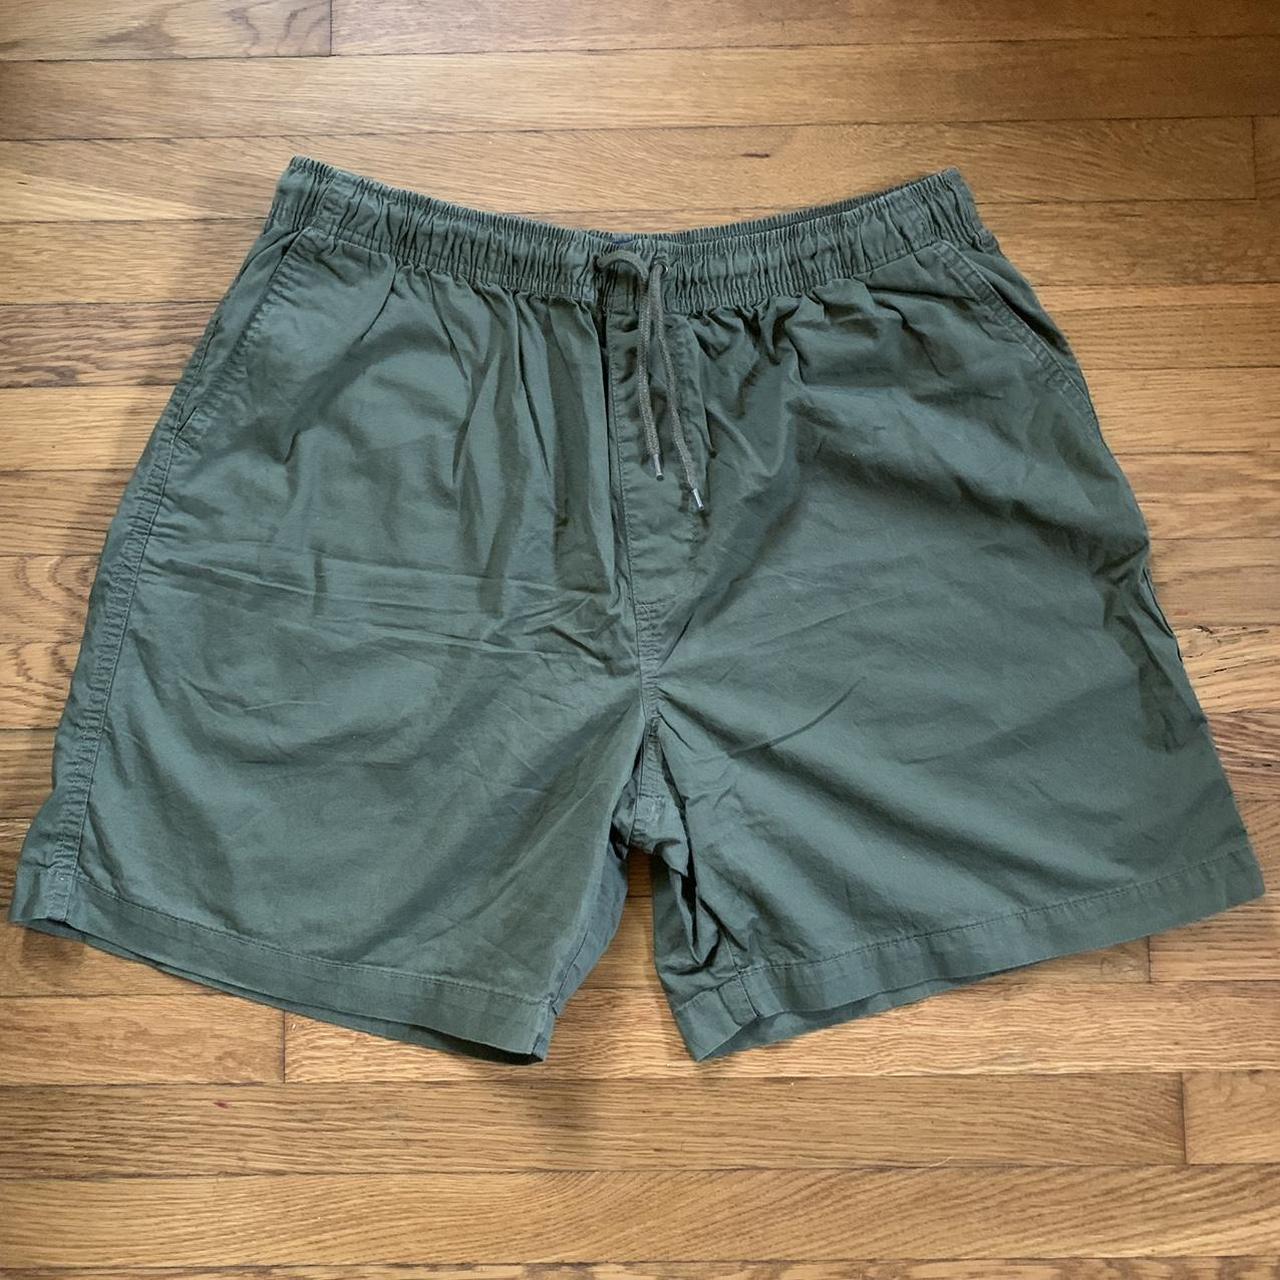 Olive green cargo shorts. They are a size x large... - Depop